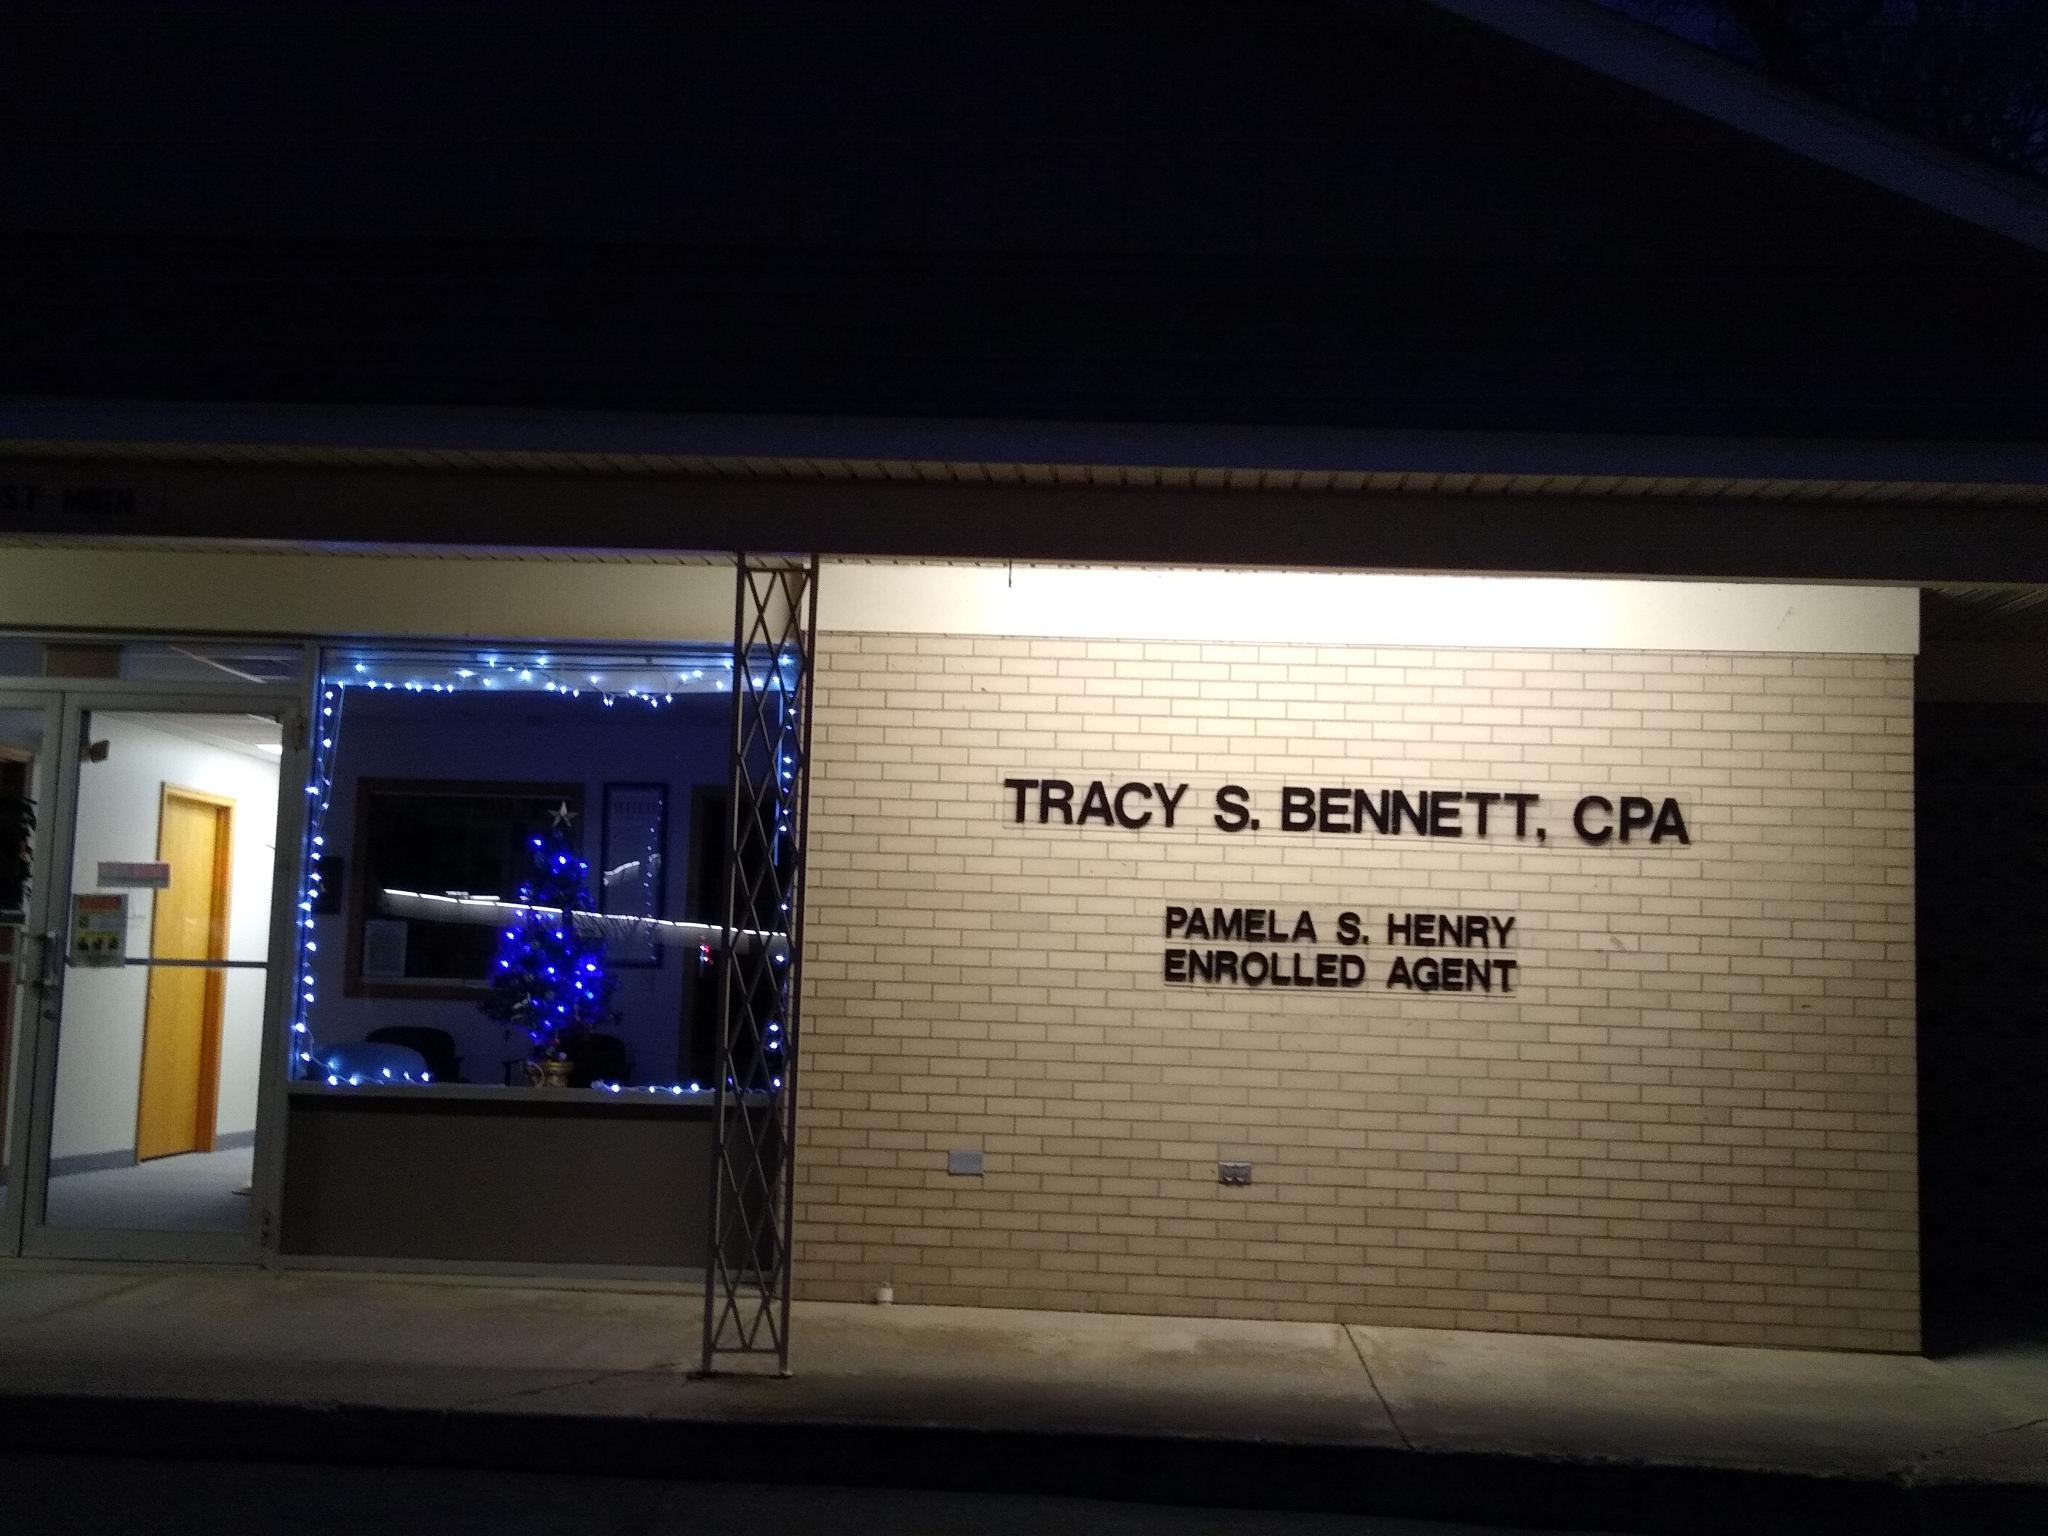 Tracy S. Bennett, CPA image